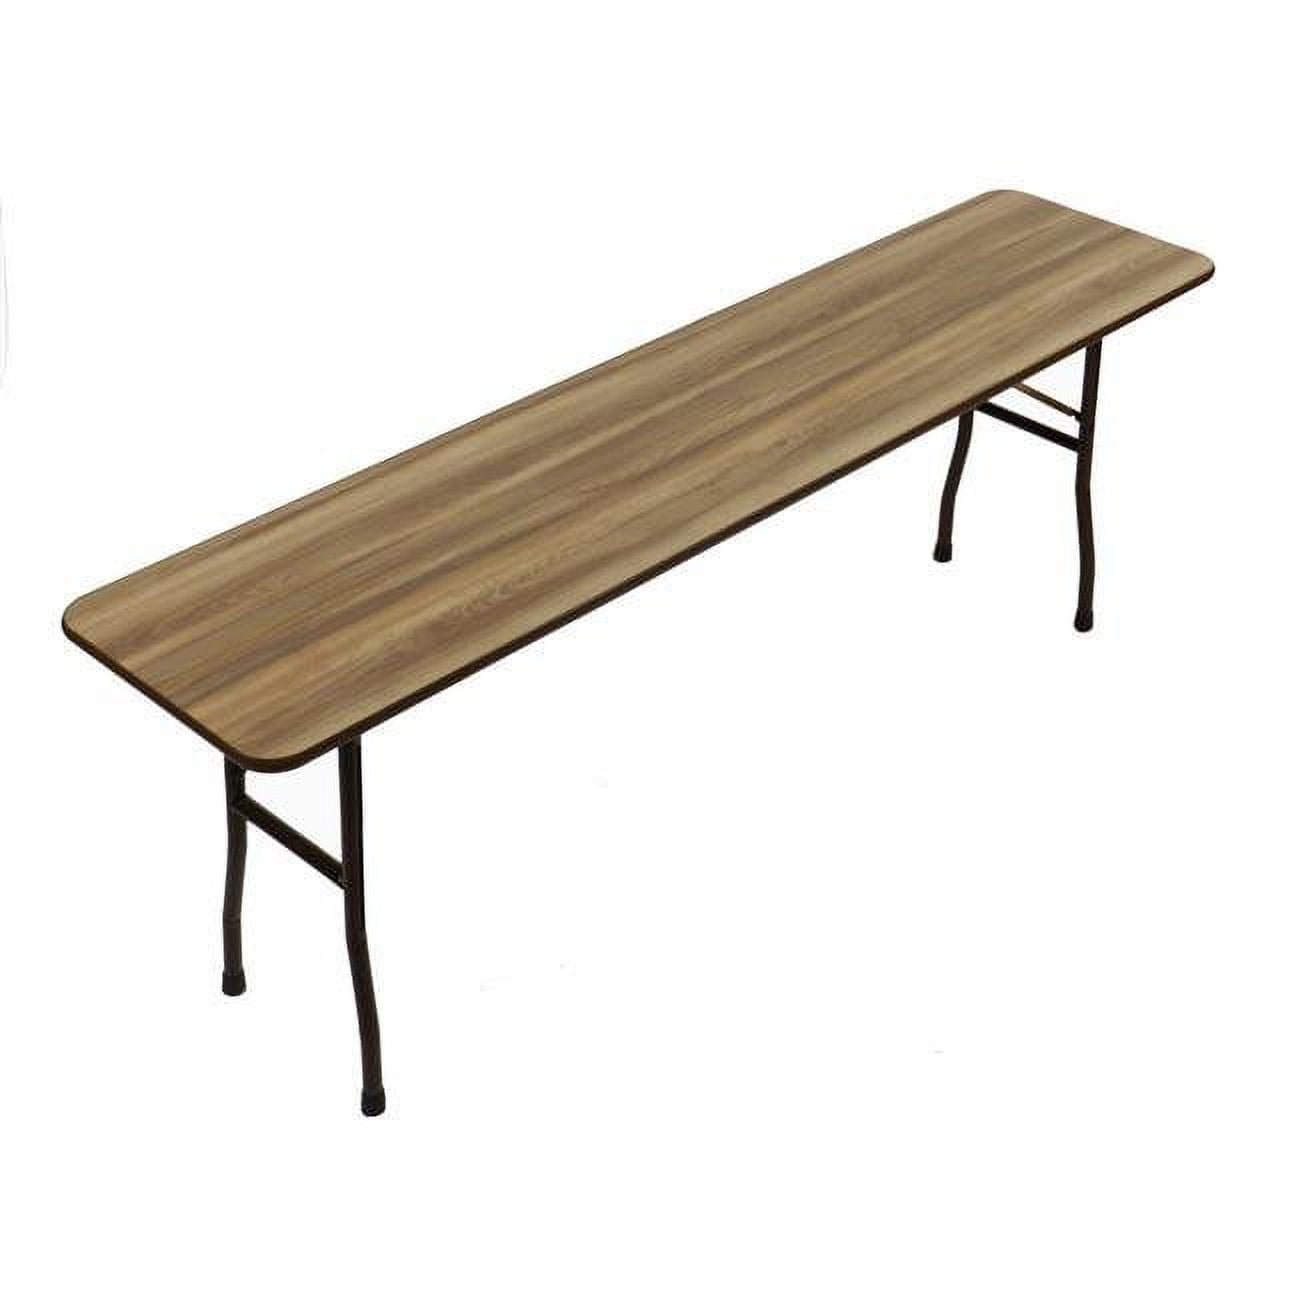 Picture of Correll CF3060PX-53 0.75 in. High Pressure Rectangular Top Folding Tables, Colonial Hickory - 30 x 60 in.